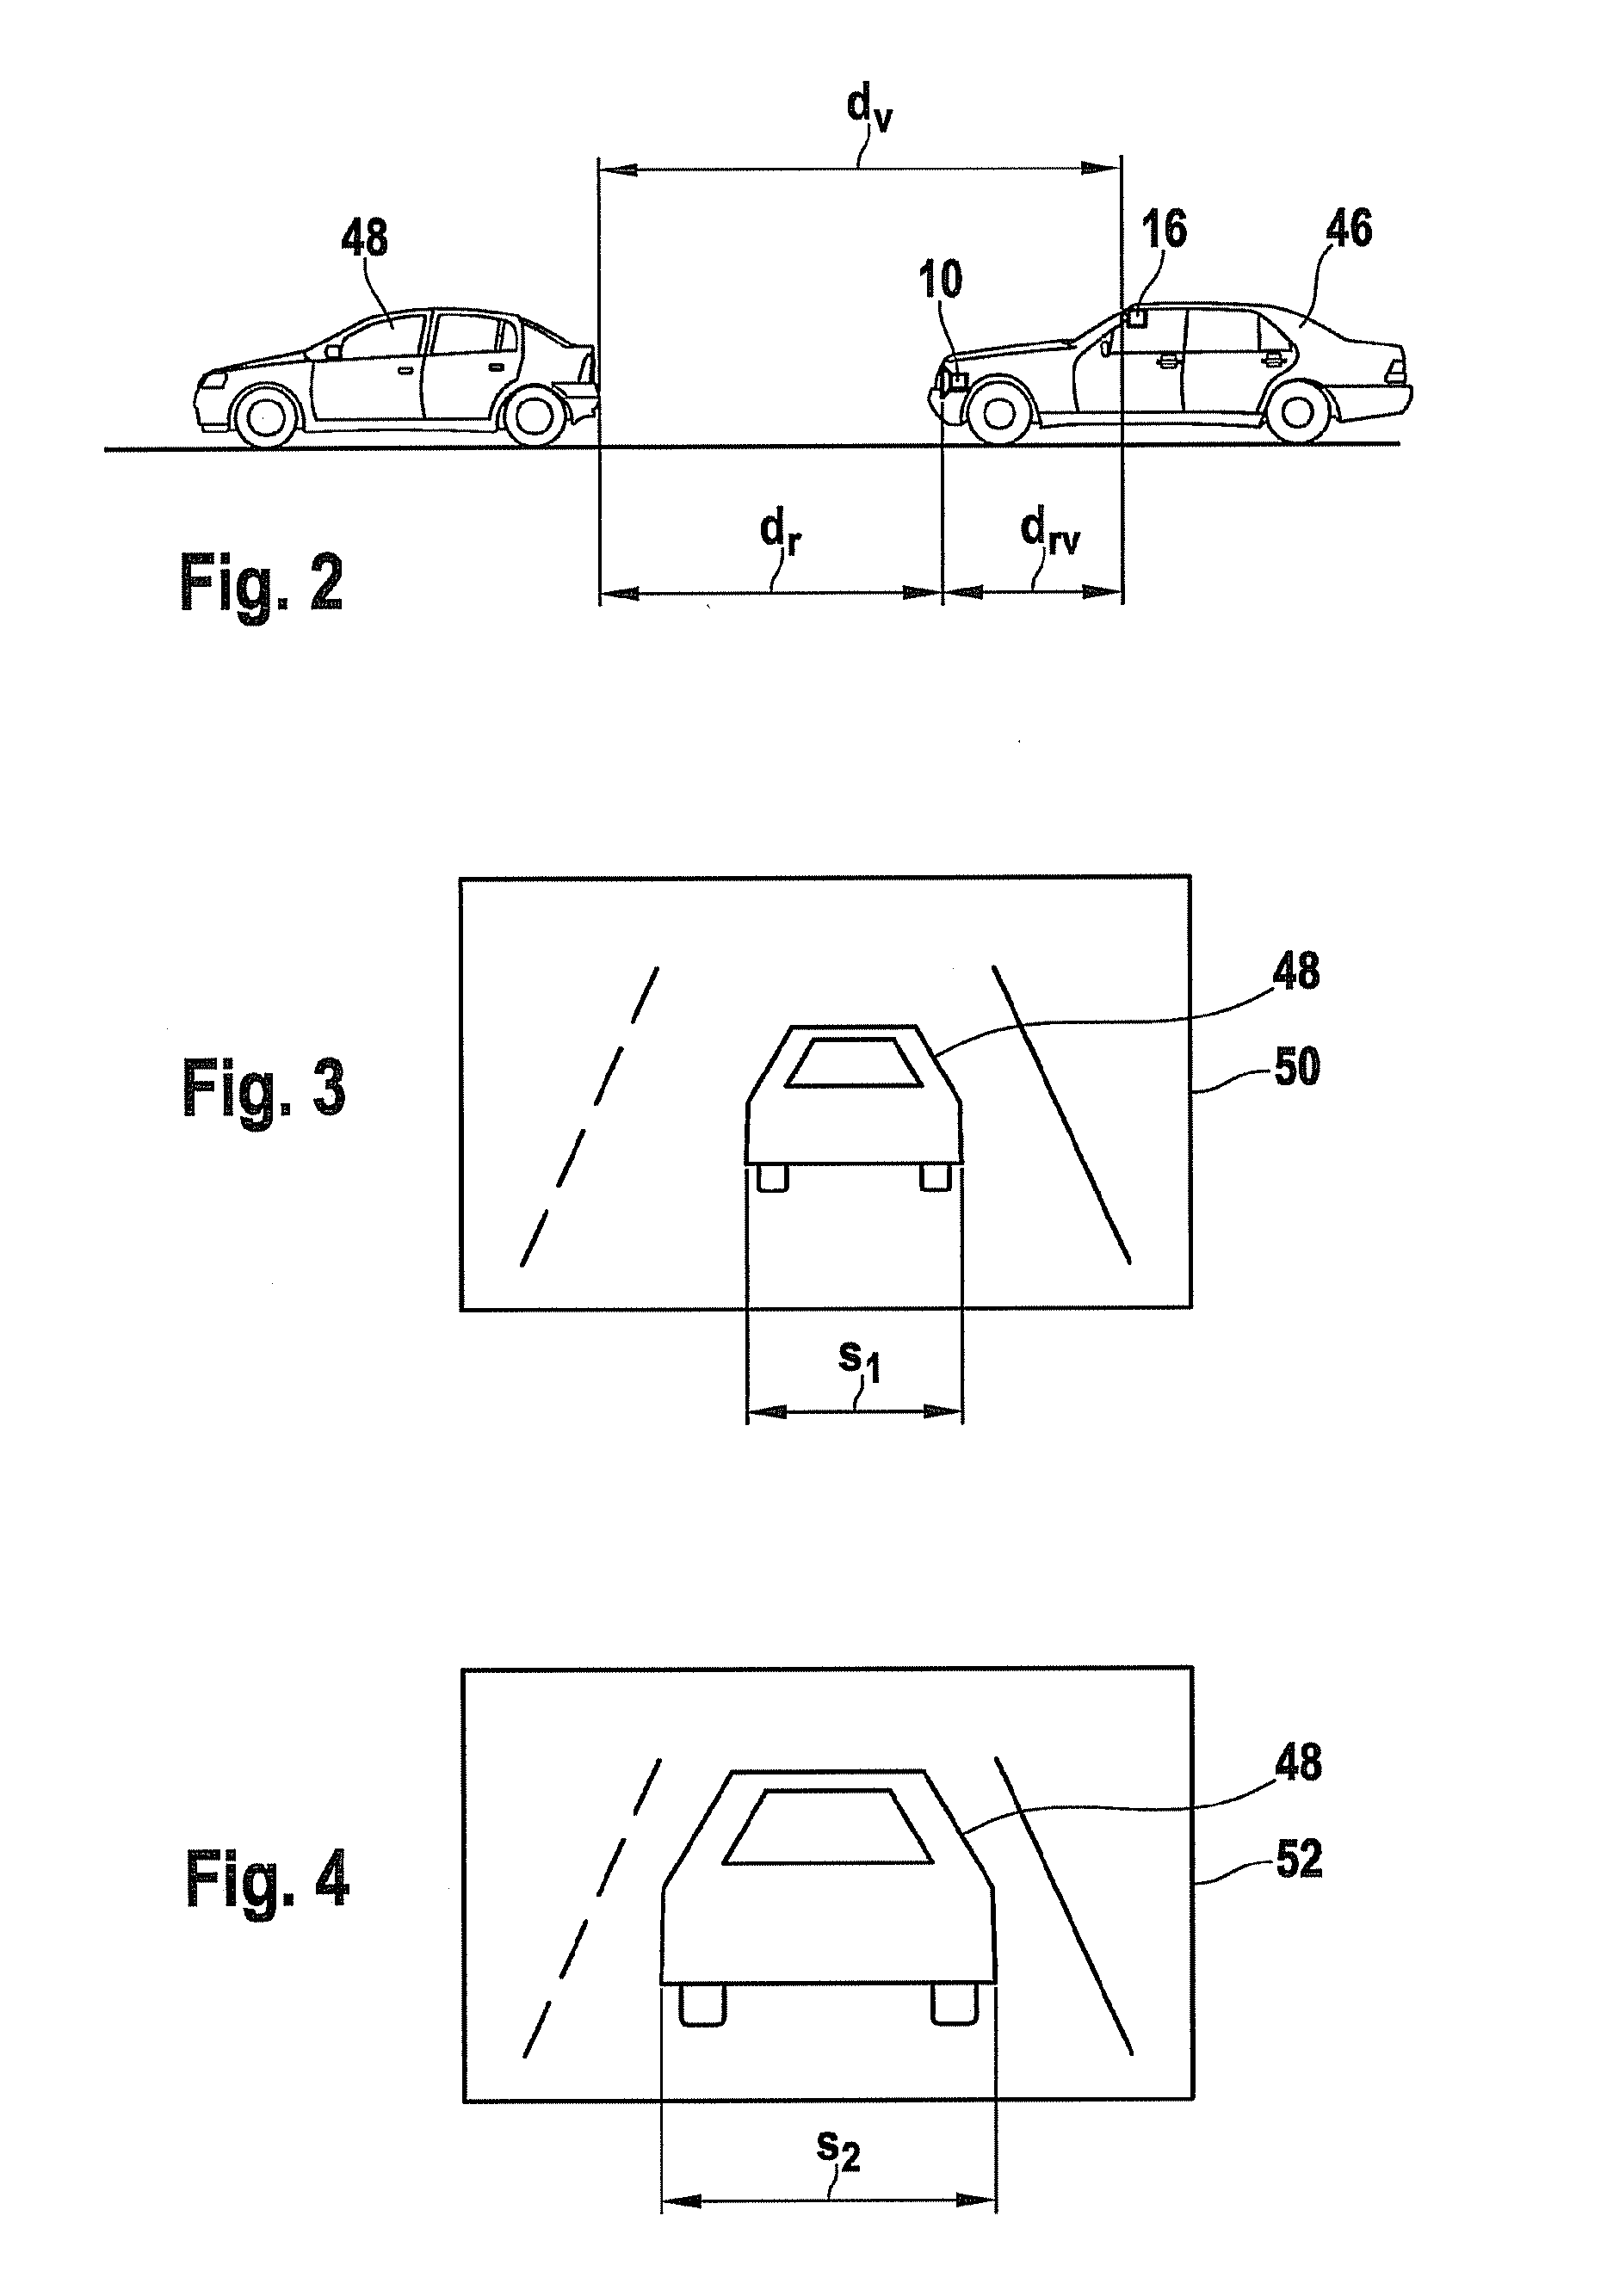 Driver assistance system and method for checking the plausibility of objects